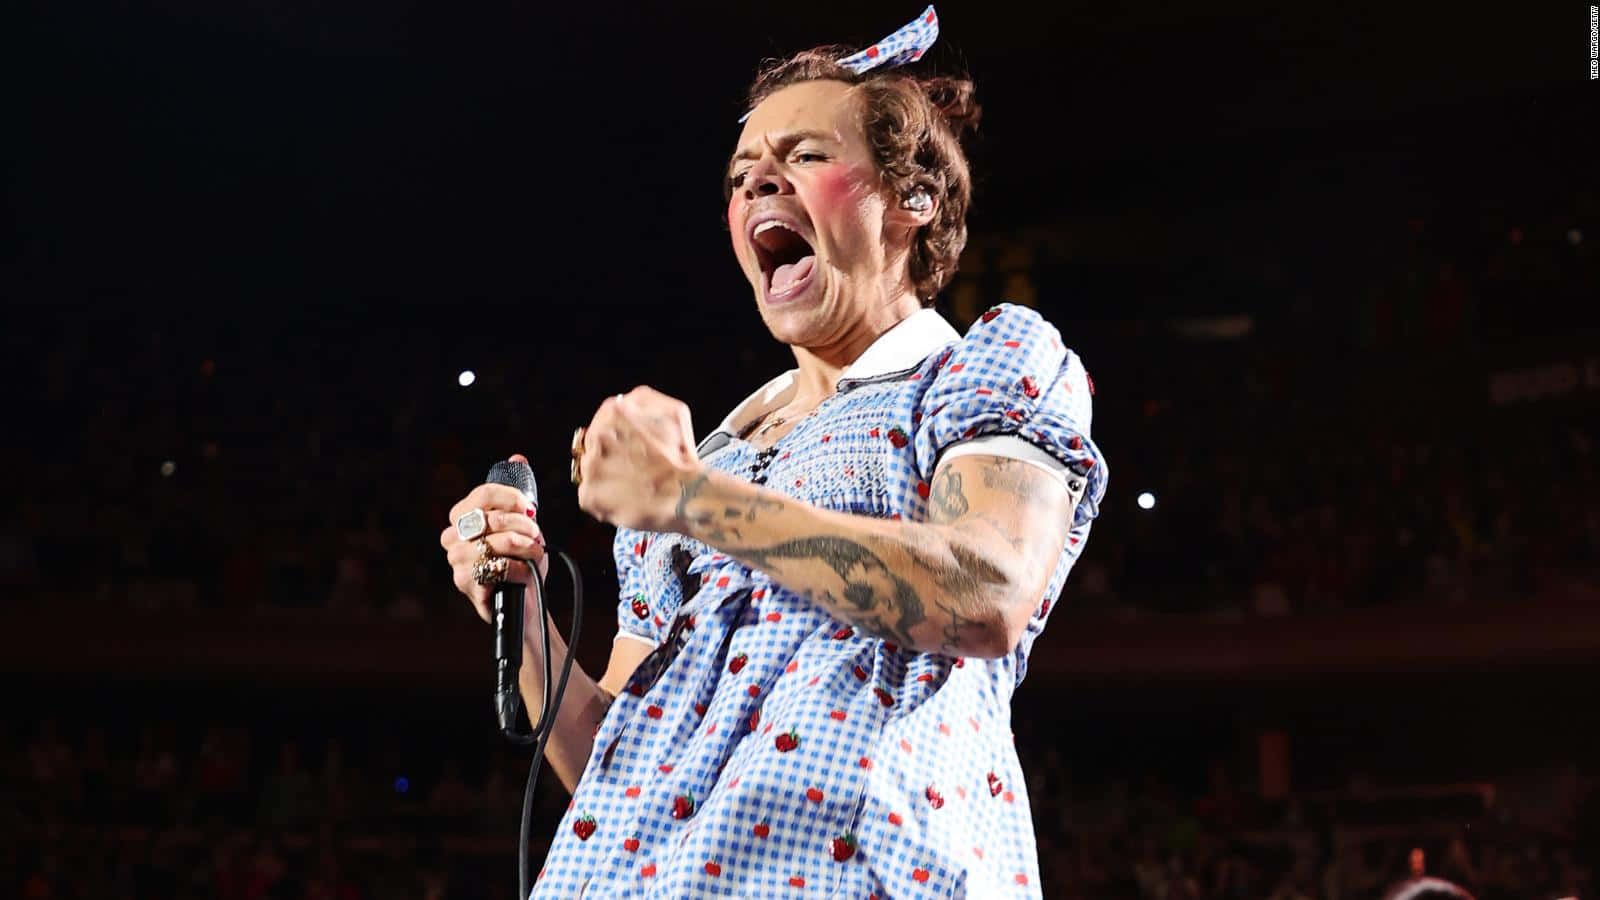 Harry Styles Brings Excitement to Music Scene